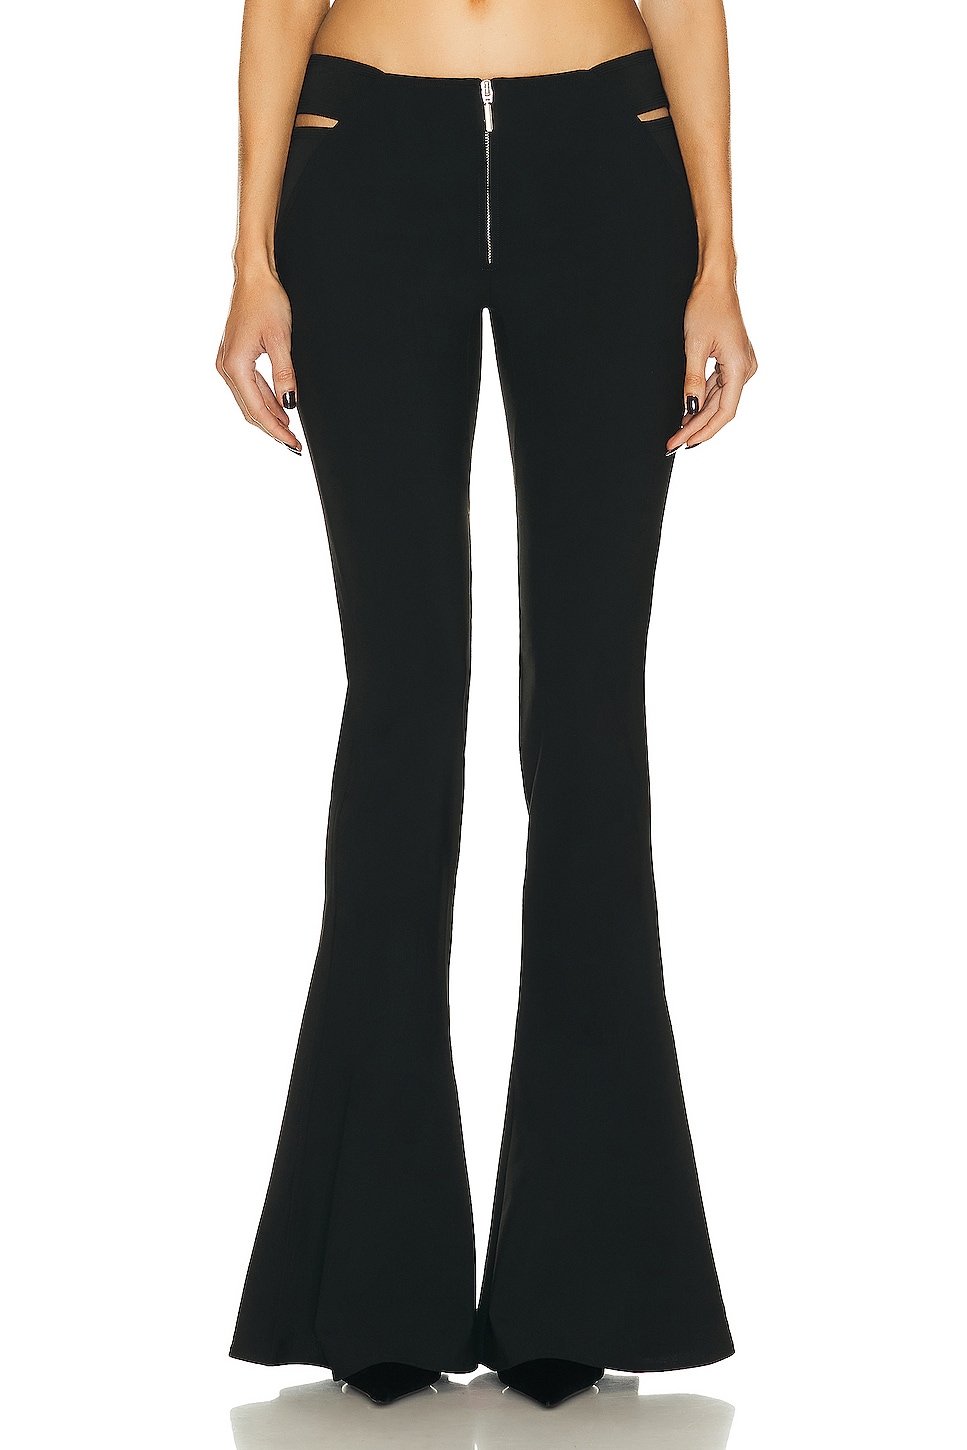 Image 1 of Jean Paul Gaultier X KNWLS Embroidered Flare Trouser in Black